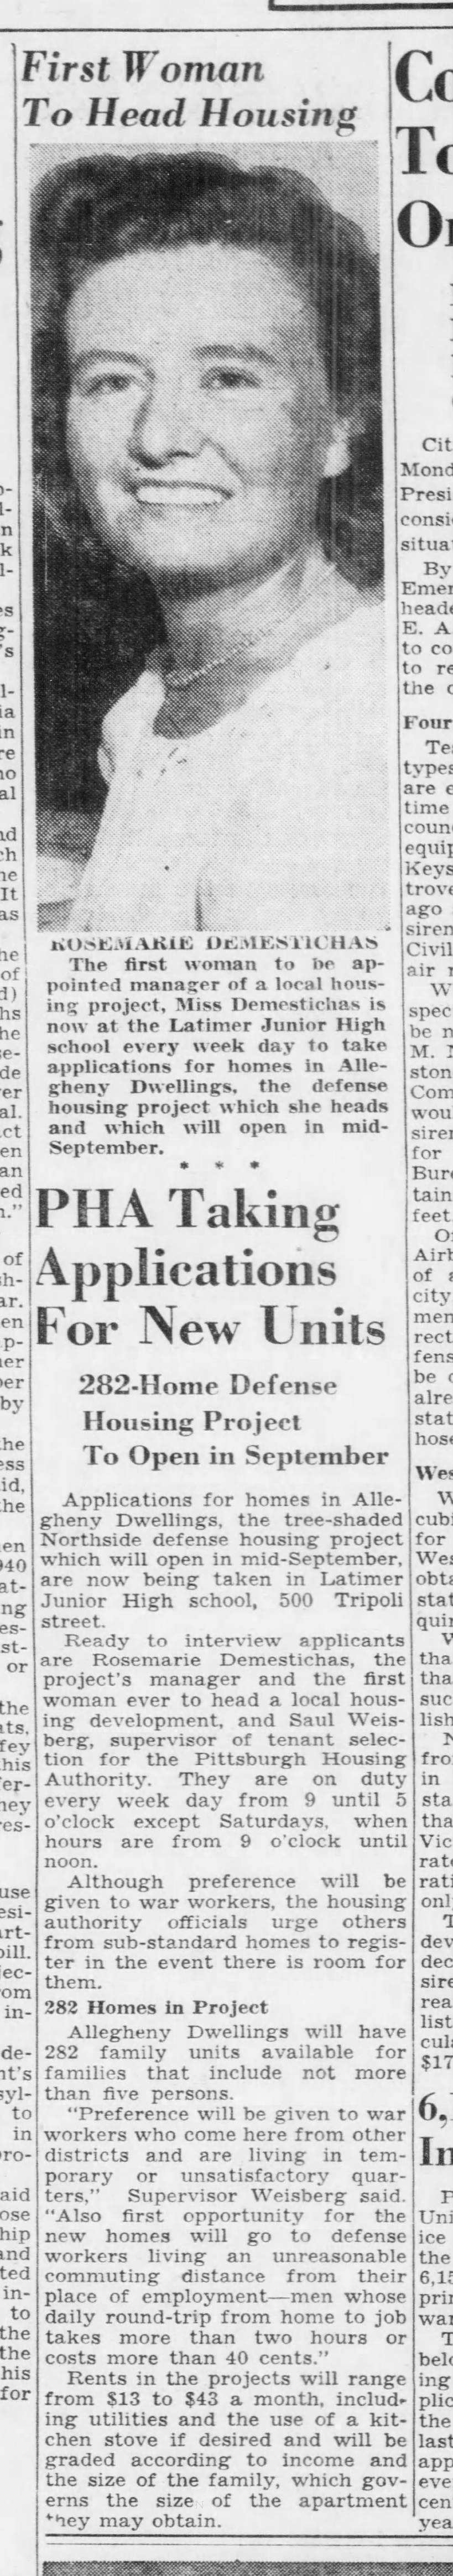 PHA Taking Applications For New Units